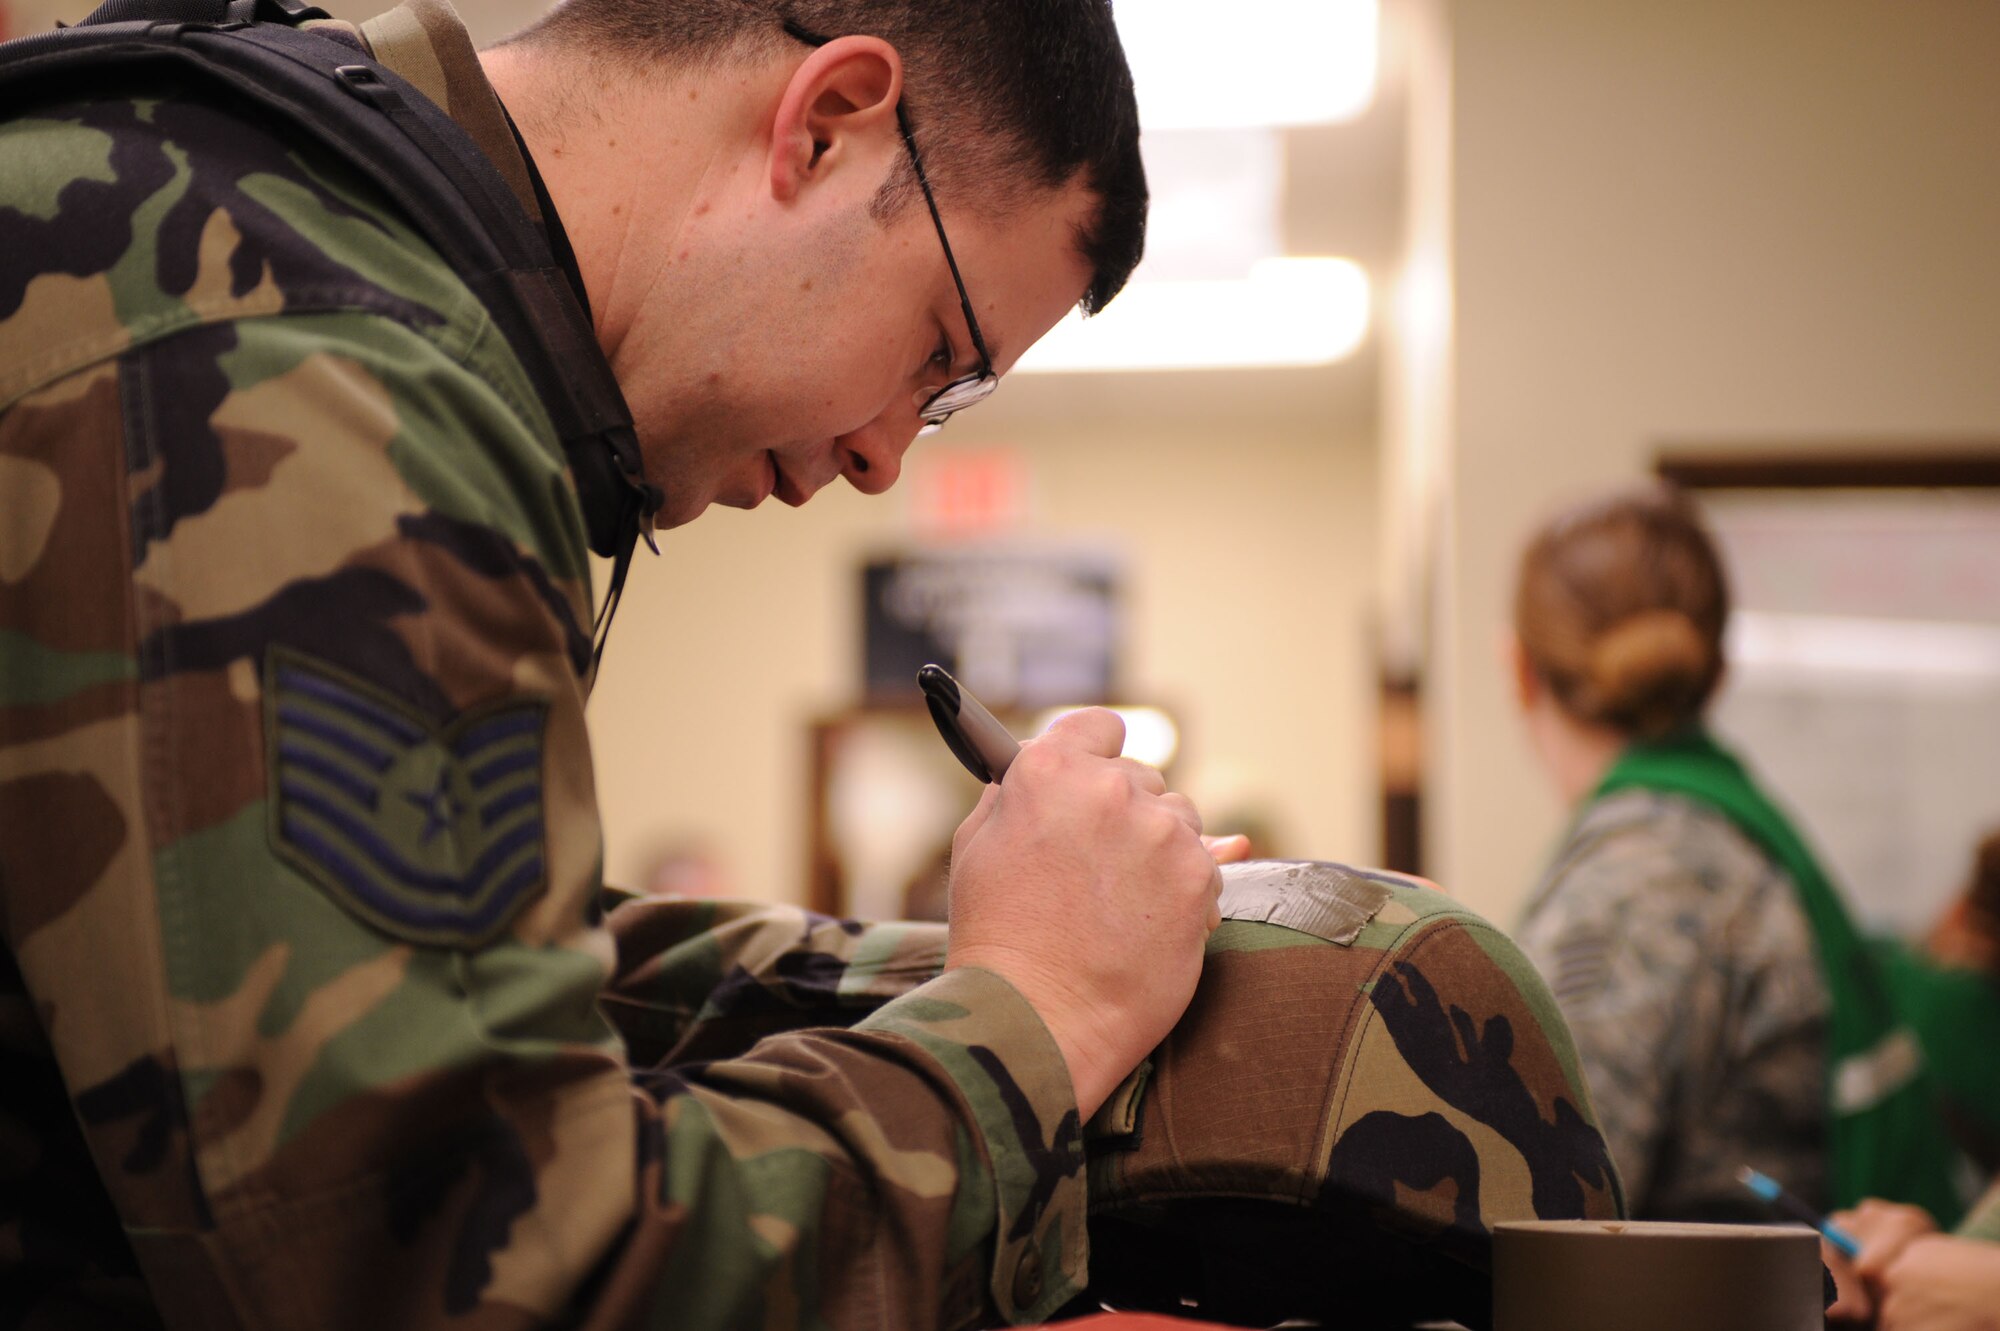 DYESS AIR FORCE BASE, Texas -- Technical Sgt. John Bailey, from the 7th Operations Support Squadron, properly labels his Kevlar helmet while processing through the personnel deployment function (PDF) line during the operational readiness inspection here, Jan. 6.  Making sure that all labels are filled out correctly is one of the many items checked while processing through the PDF line.  (U.S. Air Force photo by Staff Sgt. Darcie Ibidapo)